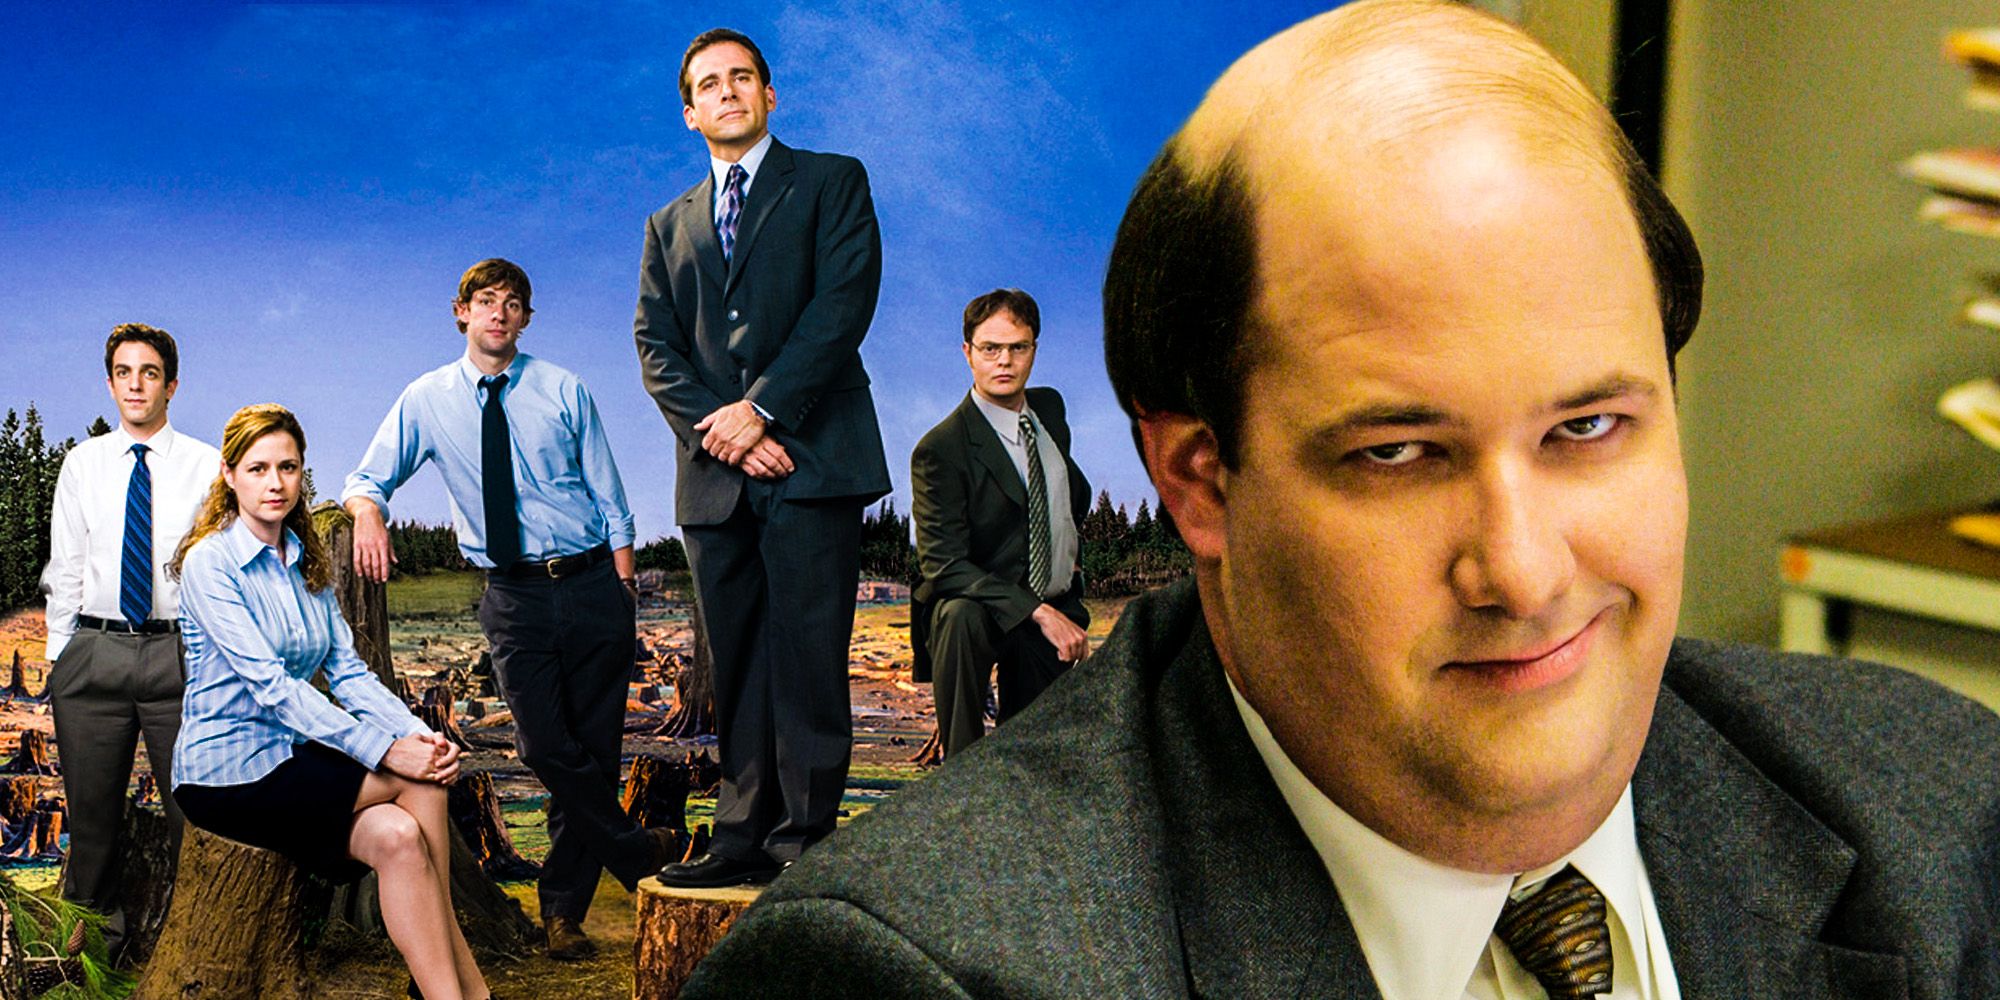 An image of Kevin looking smugly in a composite with a cast photo from The Office